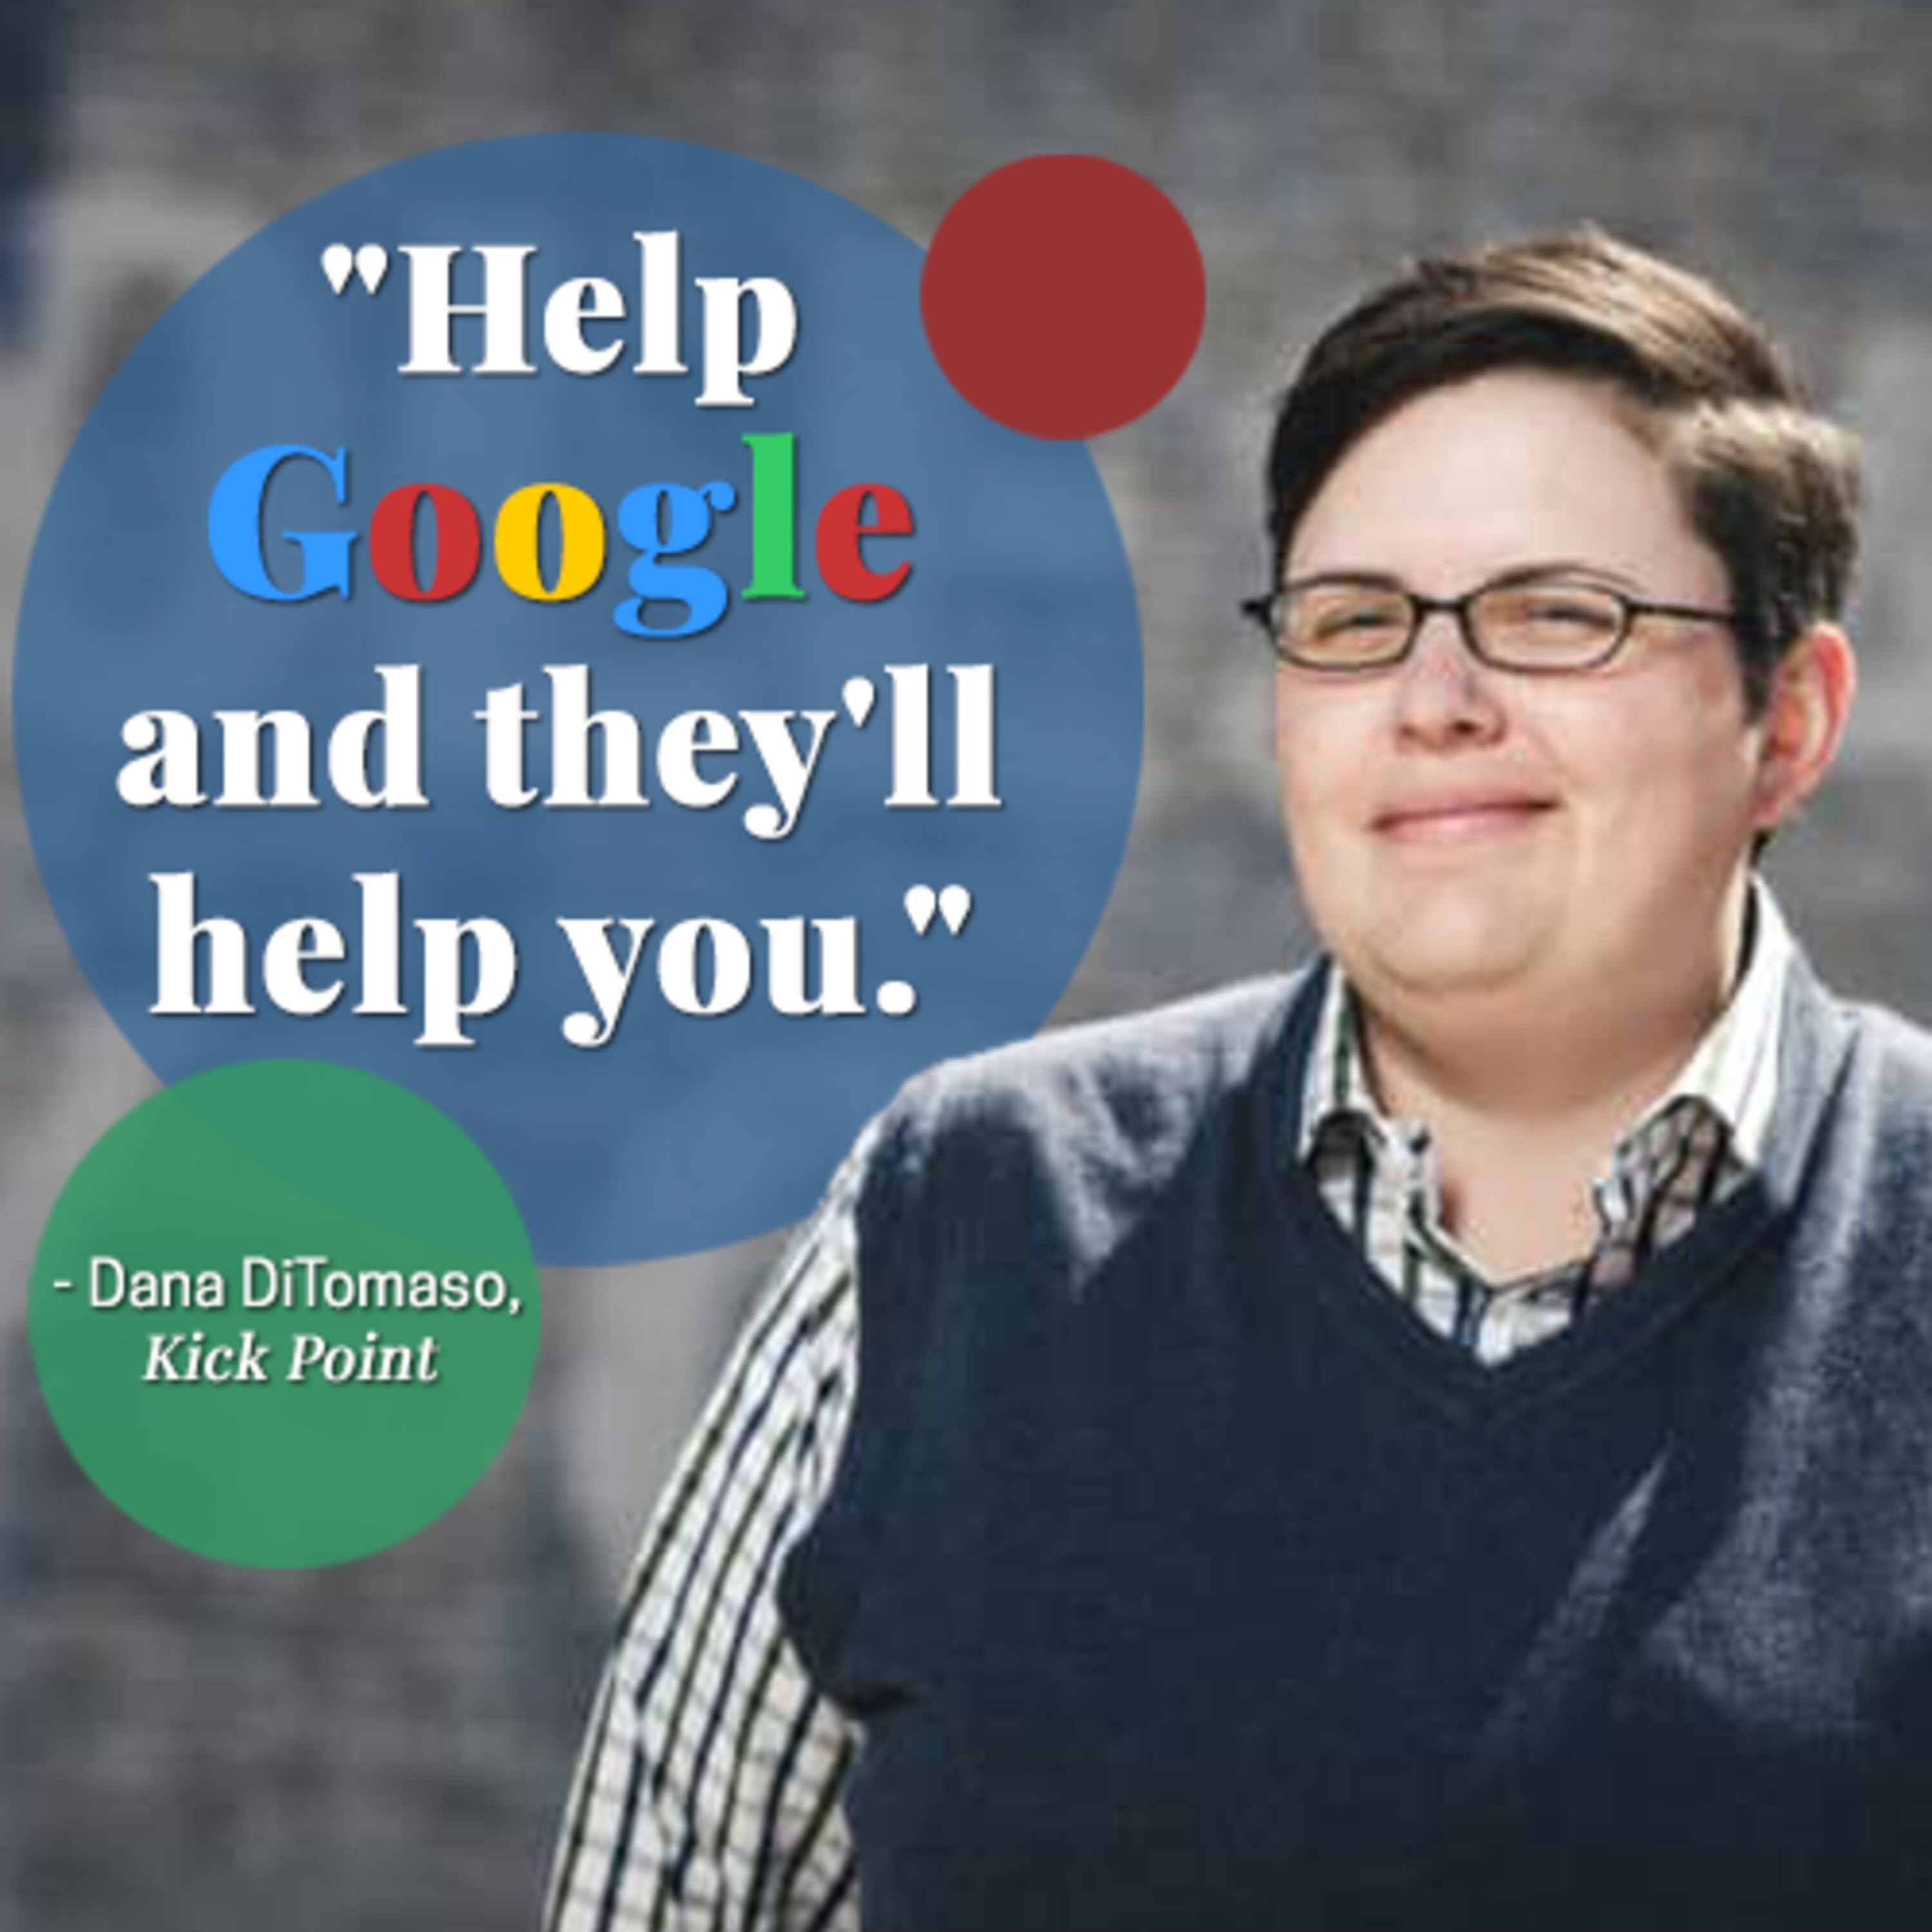 Part 2 of the best SEO tips for small business from Dana DiTomaso, one of the world’s leading SEO experts | #439